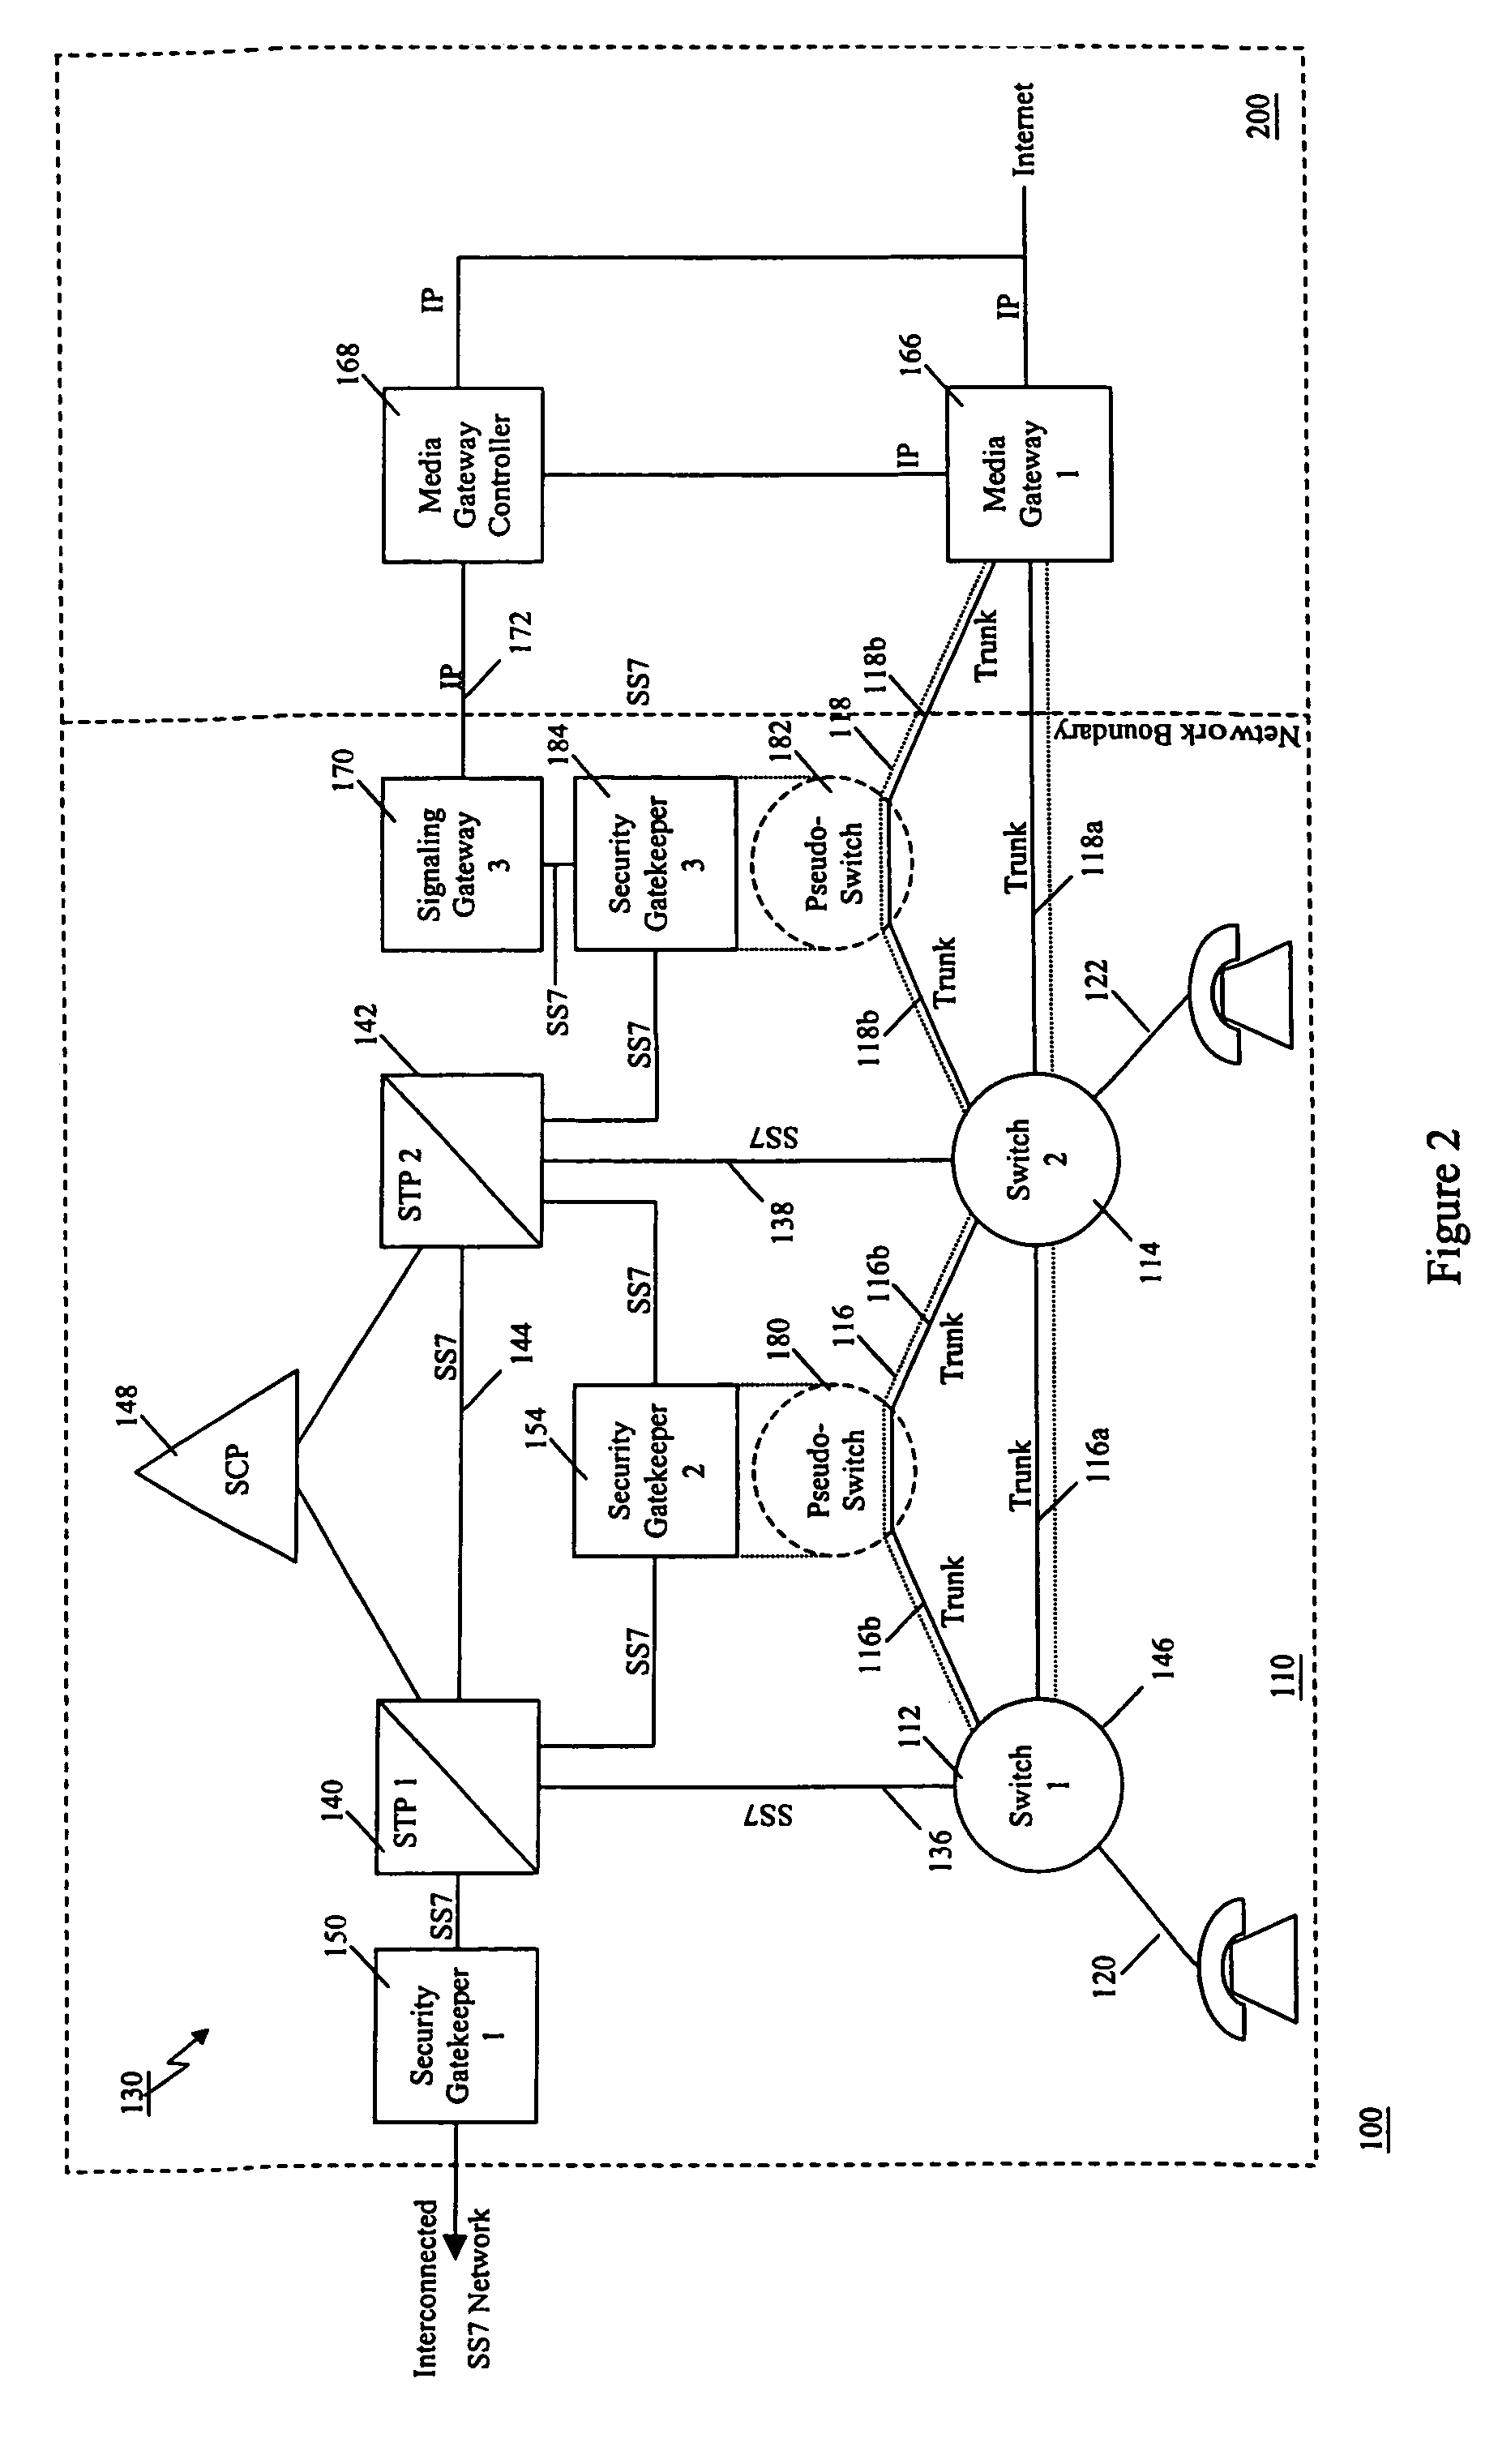 Method and apparatus for in context mediating common channel signaling messages between networks